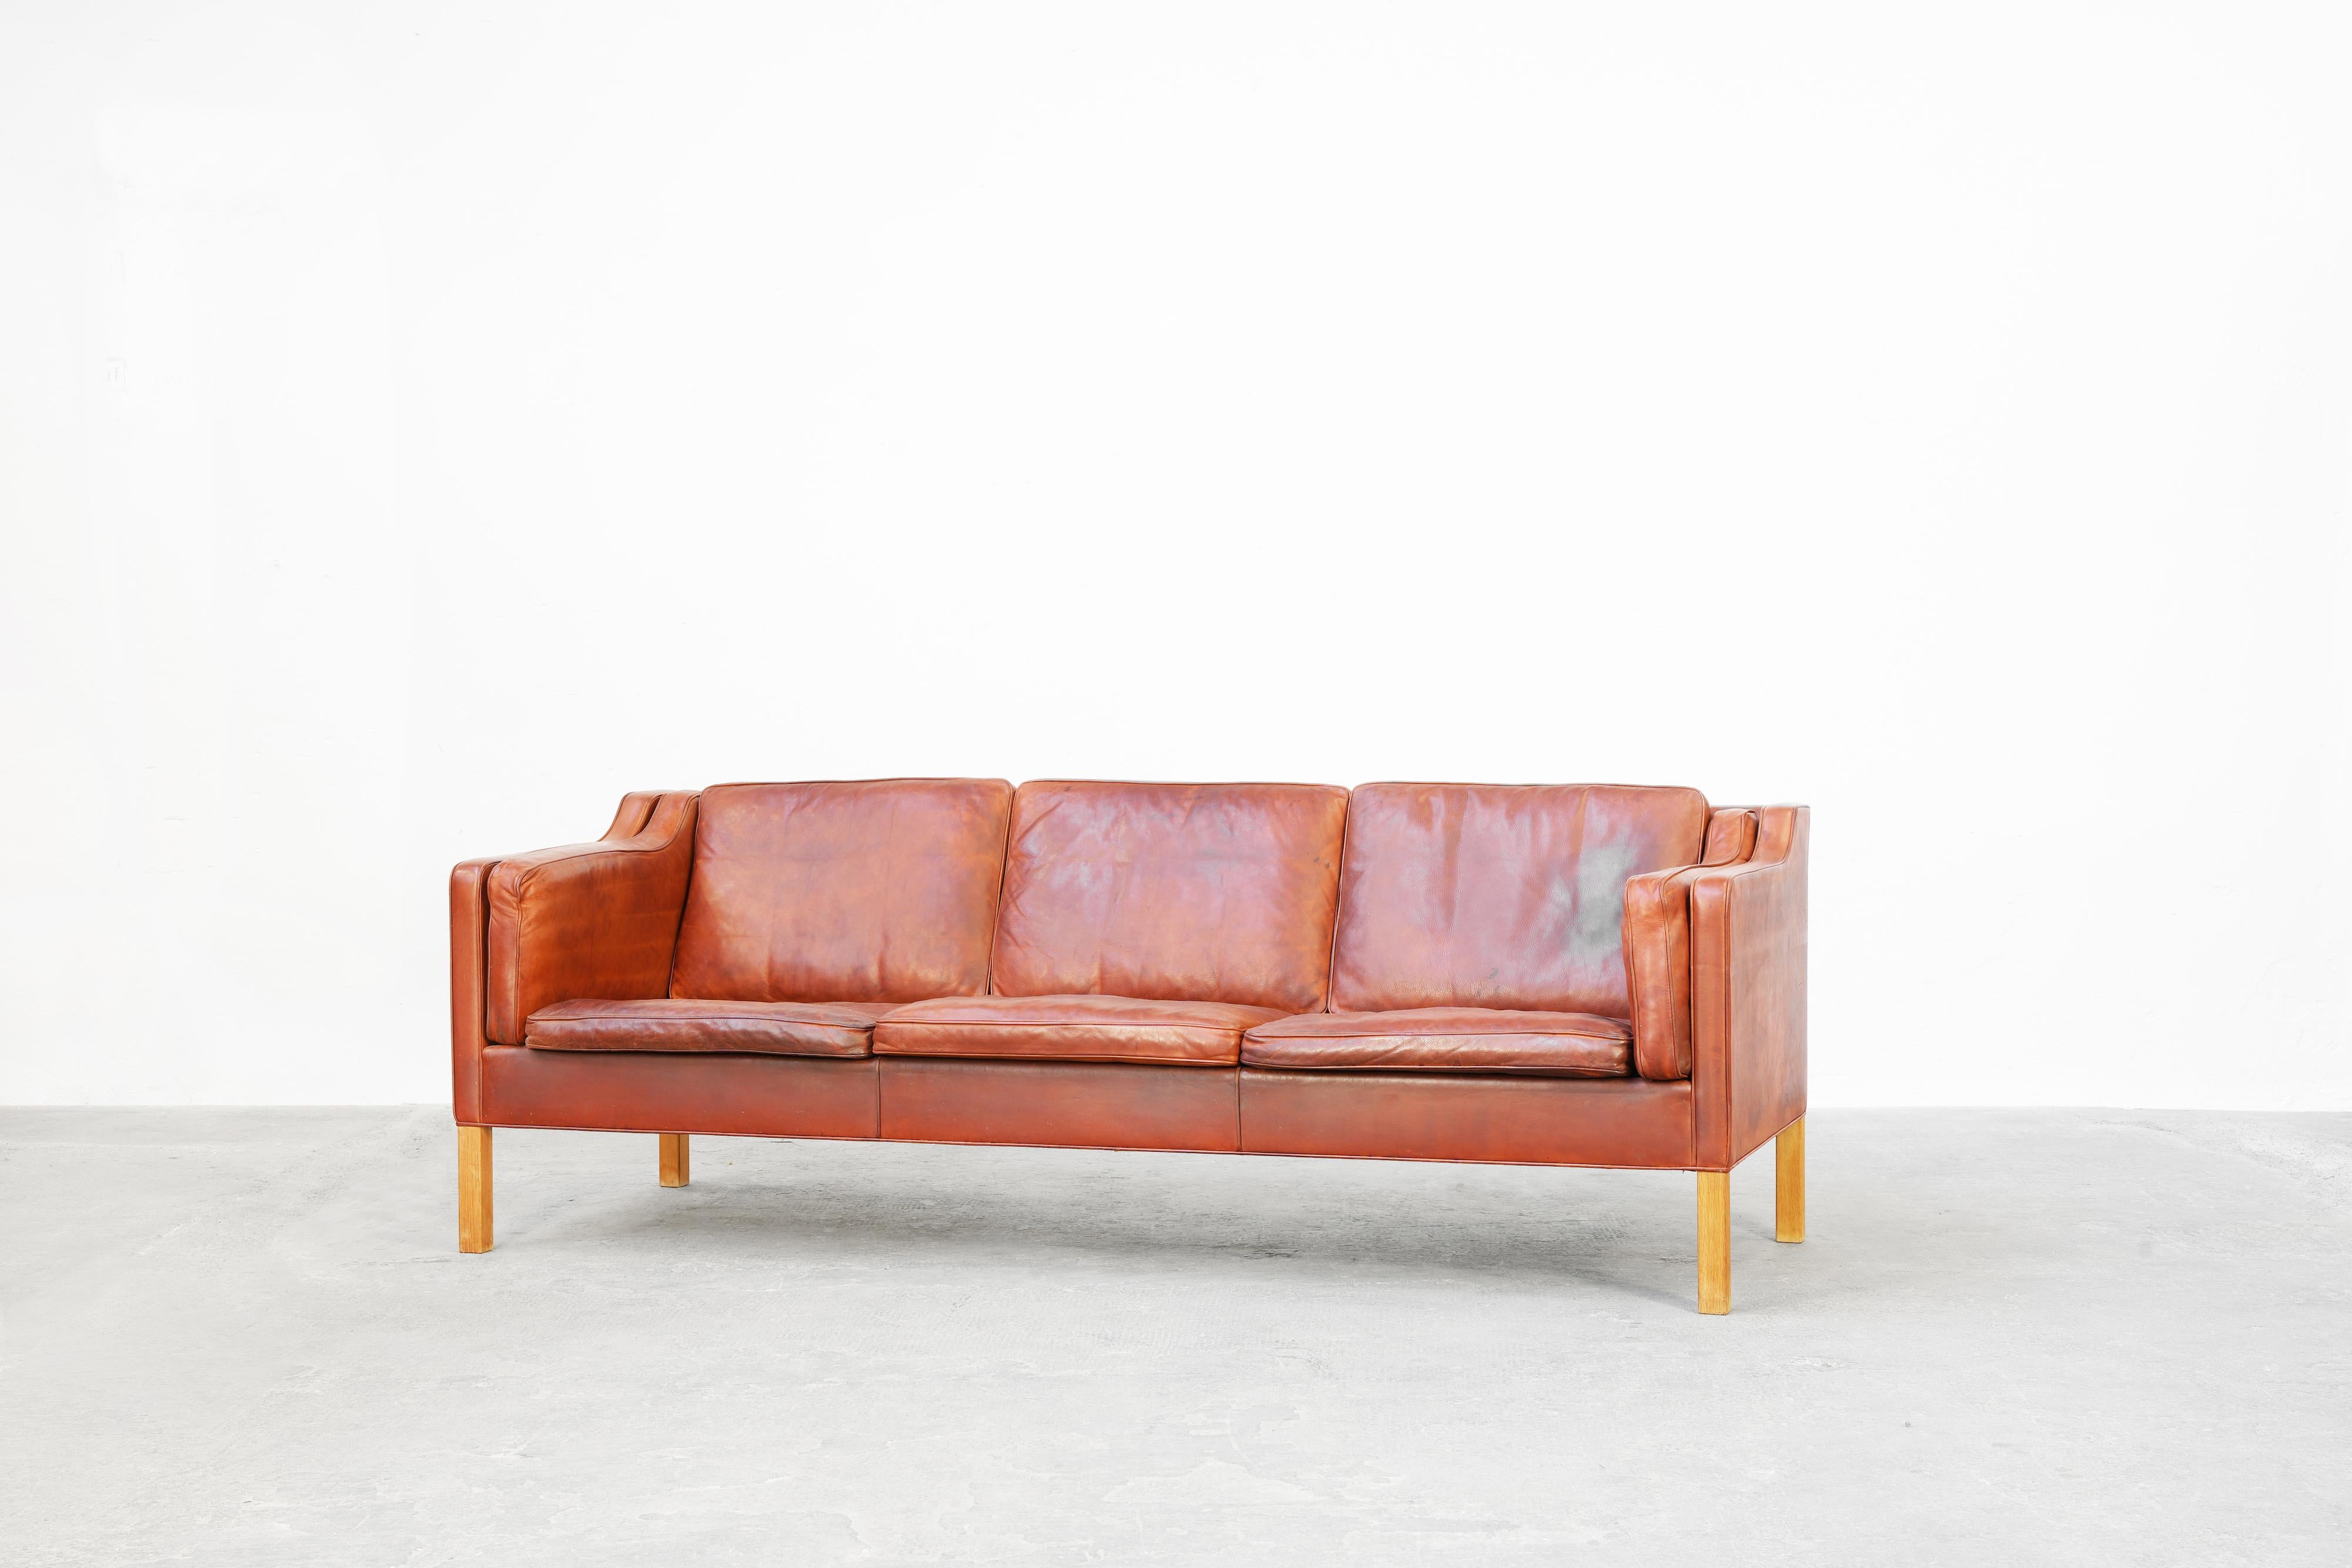 Beautiful patinated sofa mod. BM2213 designed by Børge Mogensen and produced by Fredericia Stolefabrik in Denmark, 1962.

This sofa comes in a great original condition with patinated leather in brown-cognac and oak legs.

This model was designed